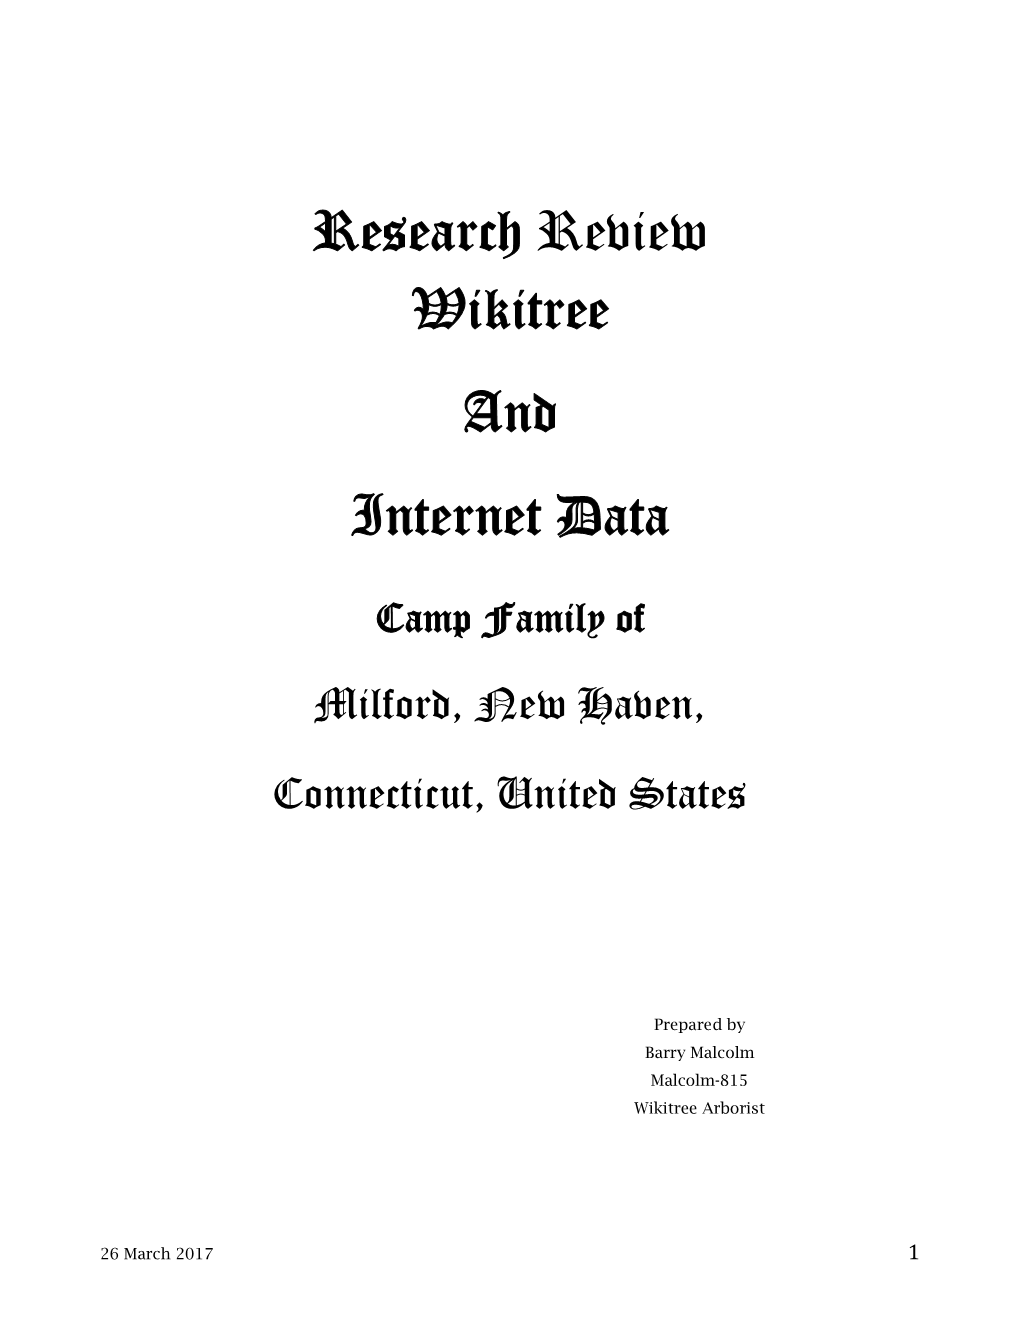 Research Review Wikitree and Internet Data